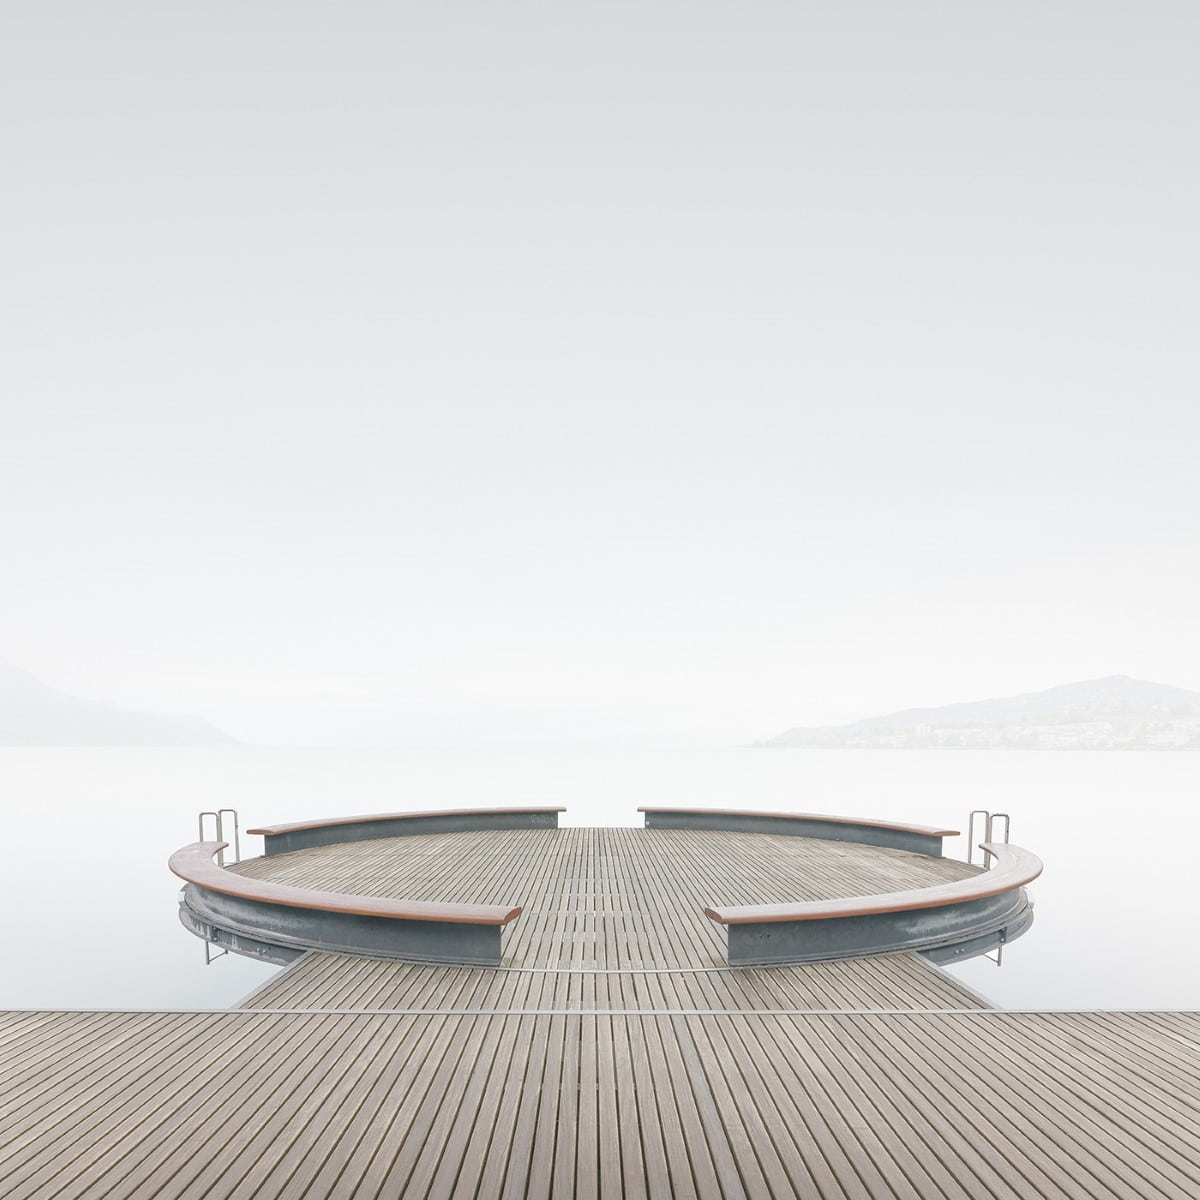 Minimalist photo of a dock on the water